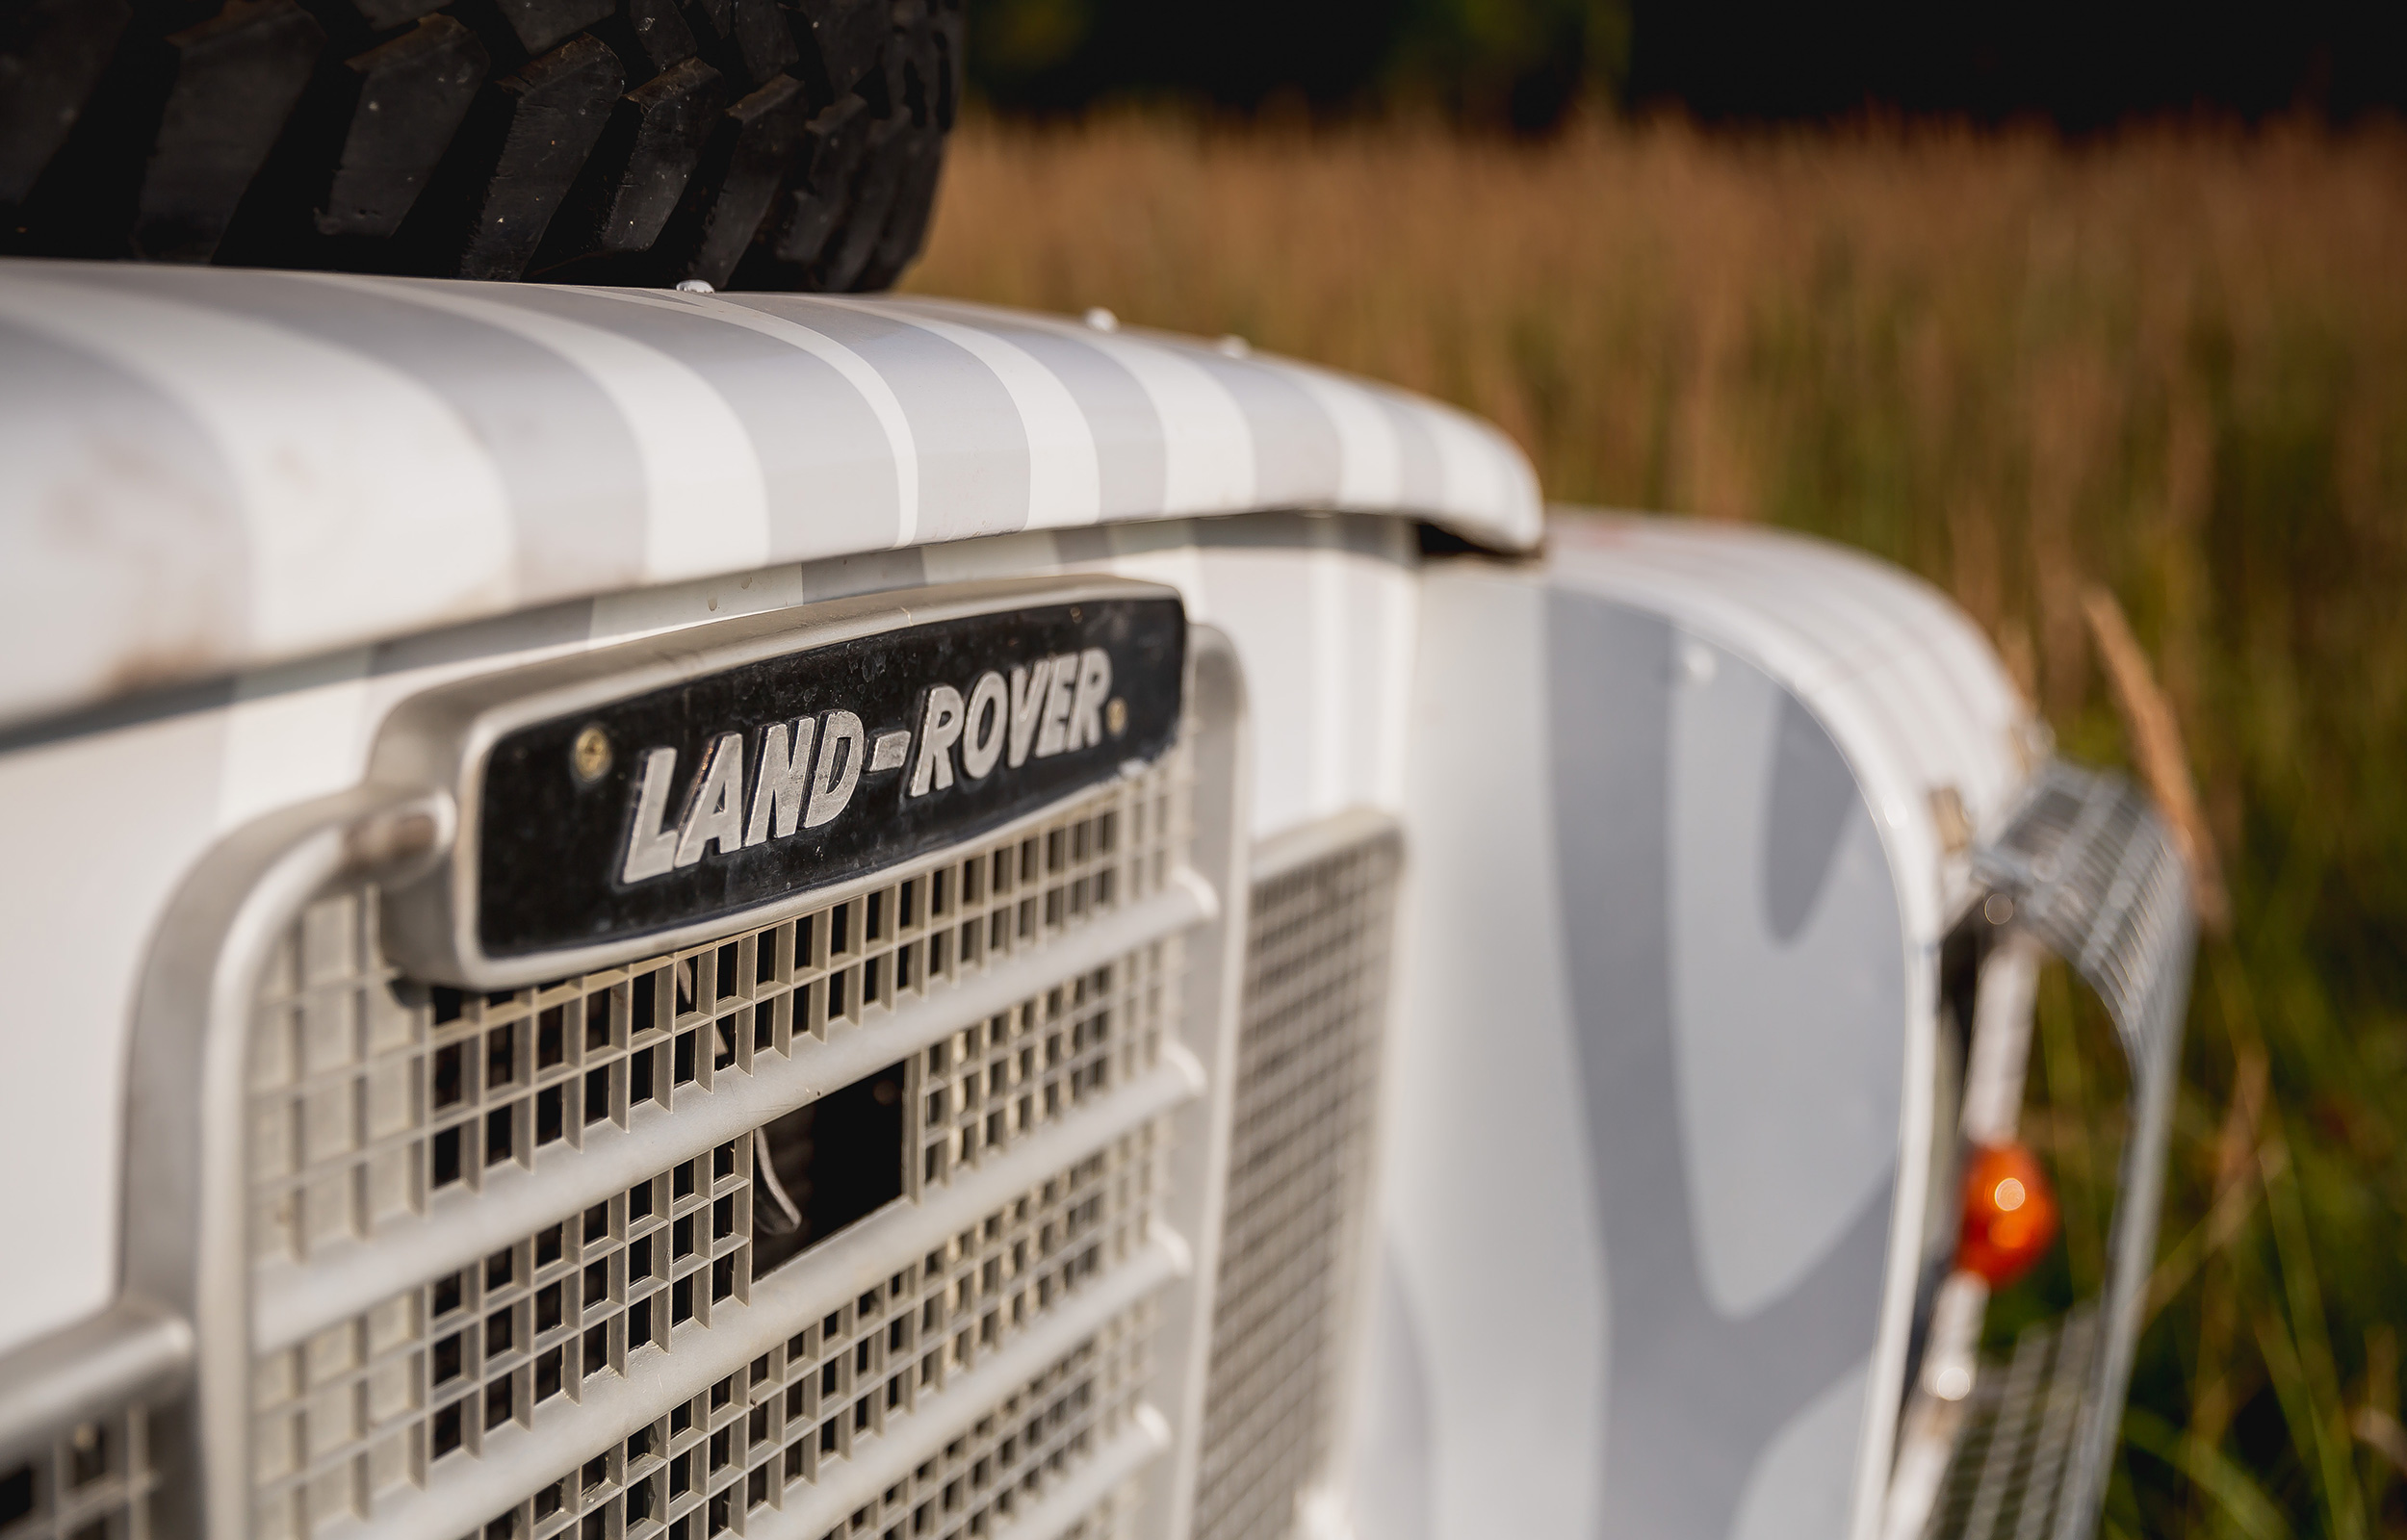 Land Rover Off Road Taster - one hour